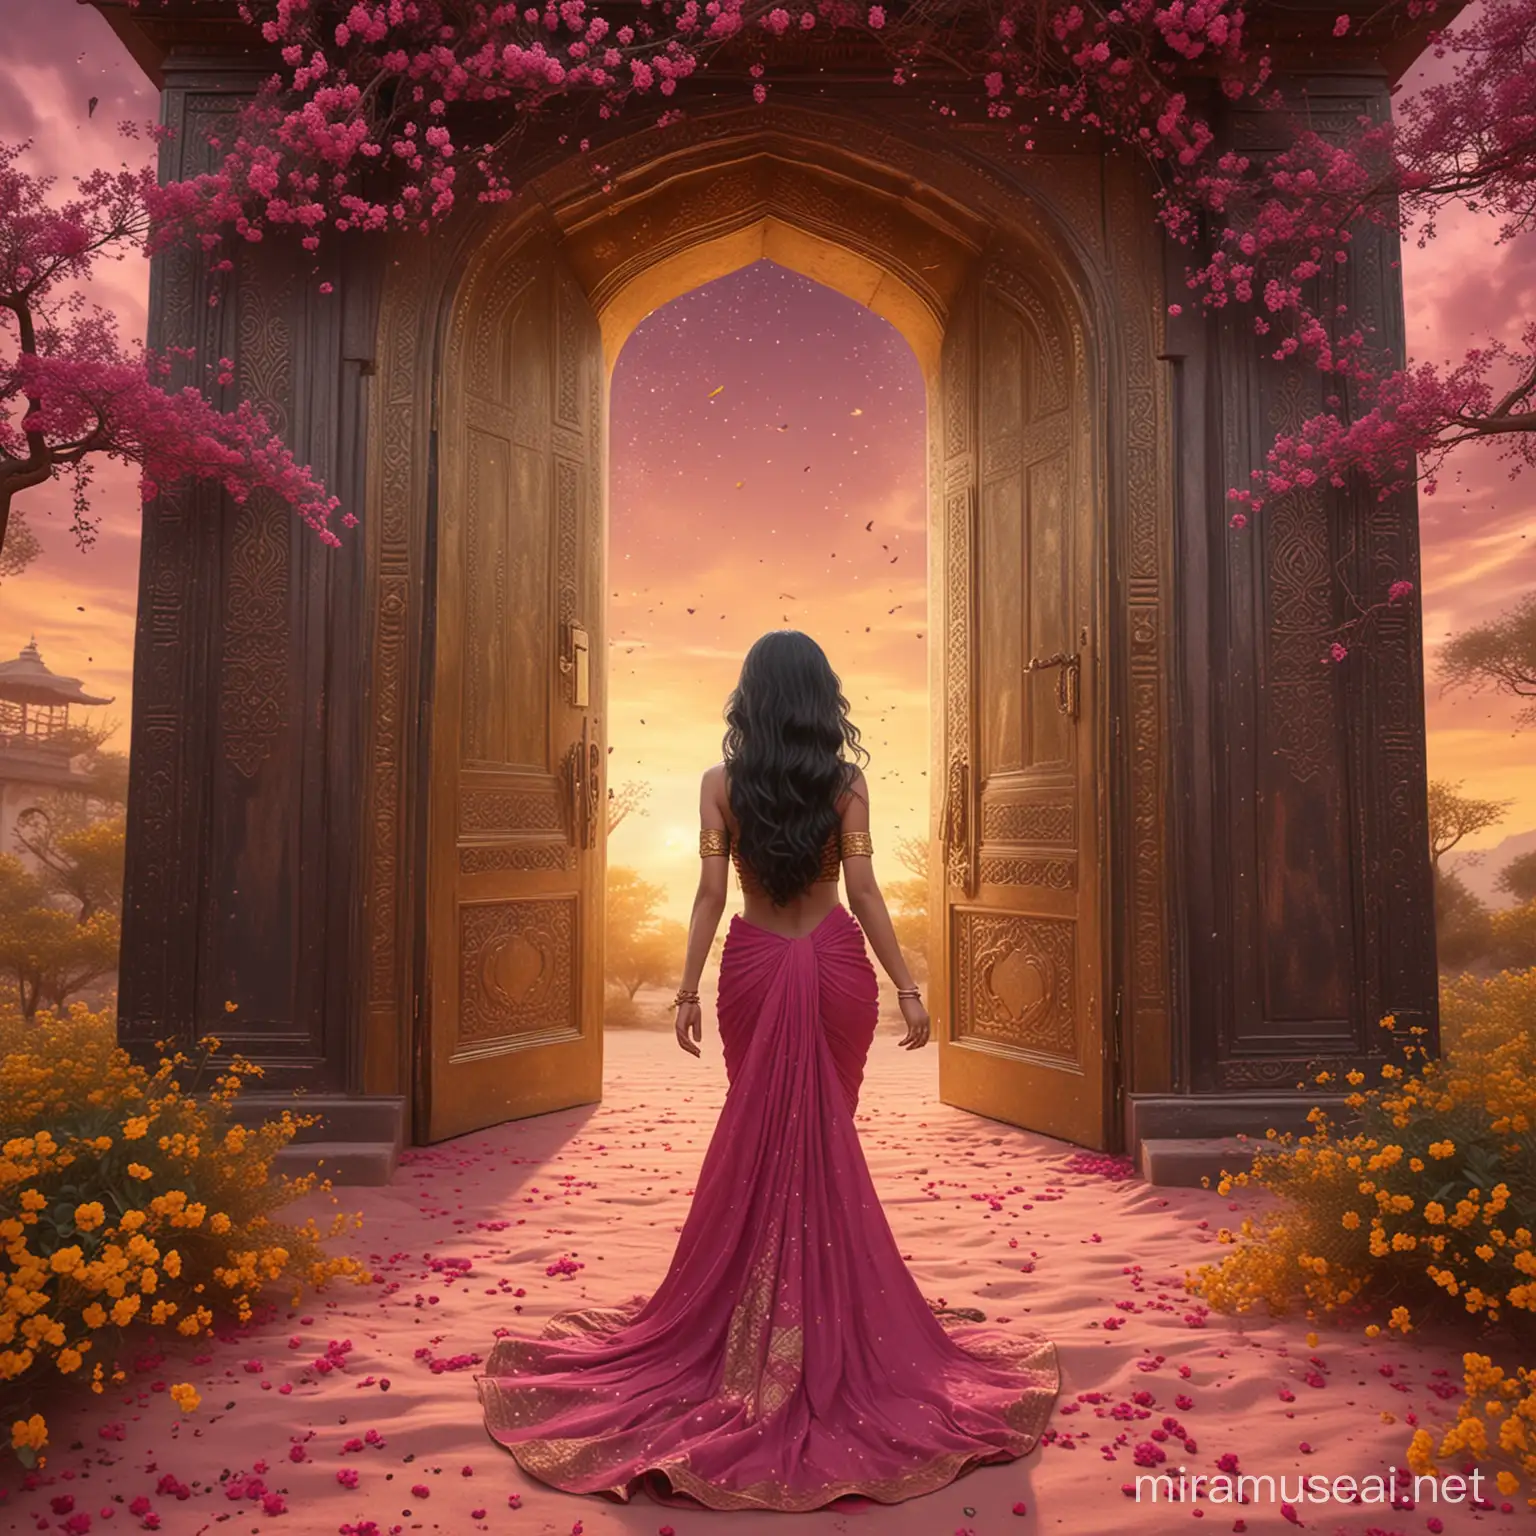 A beautiful woman, from behind, walking to an opened golden arabian door, surrounded by dark yellow flowers and dark pink dust. Long wavy black hair. Elegant long dark yellow and dark pink sari dress, haute couture. Background a dark pink sky with nebula and dark pink clouds. Big floral trees. 8k, fantasy, illustration, digital art, illustration art, fantasy art, fantasy style